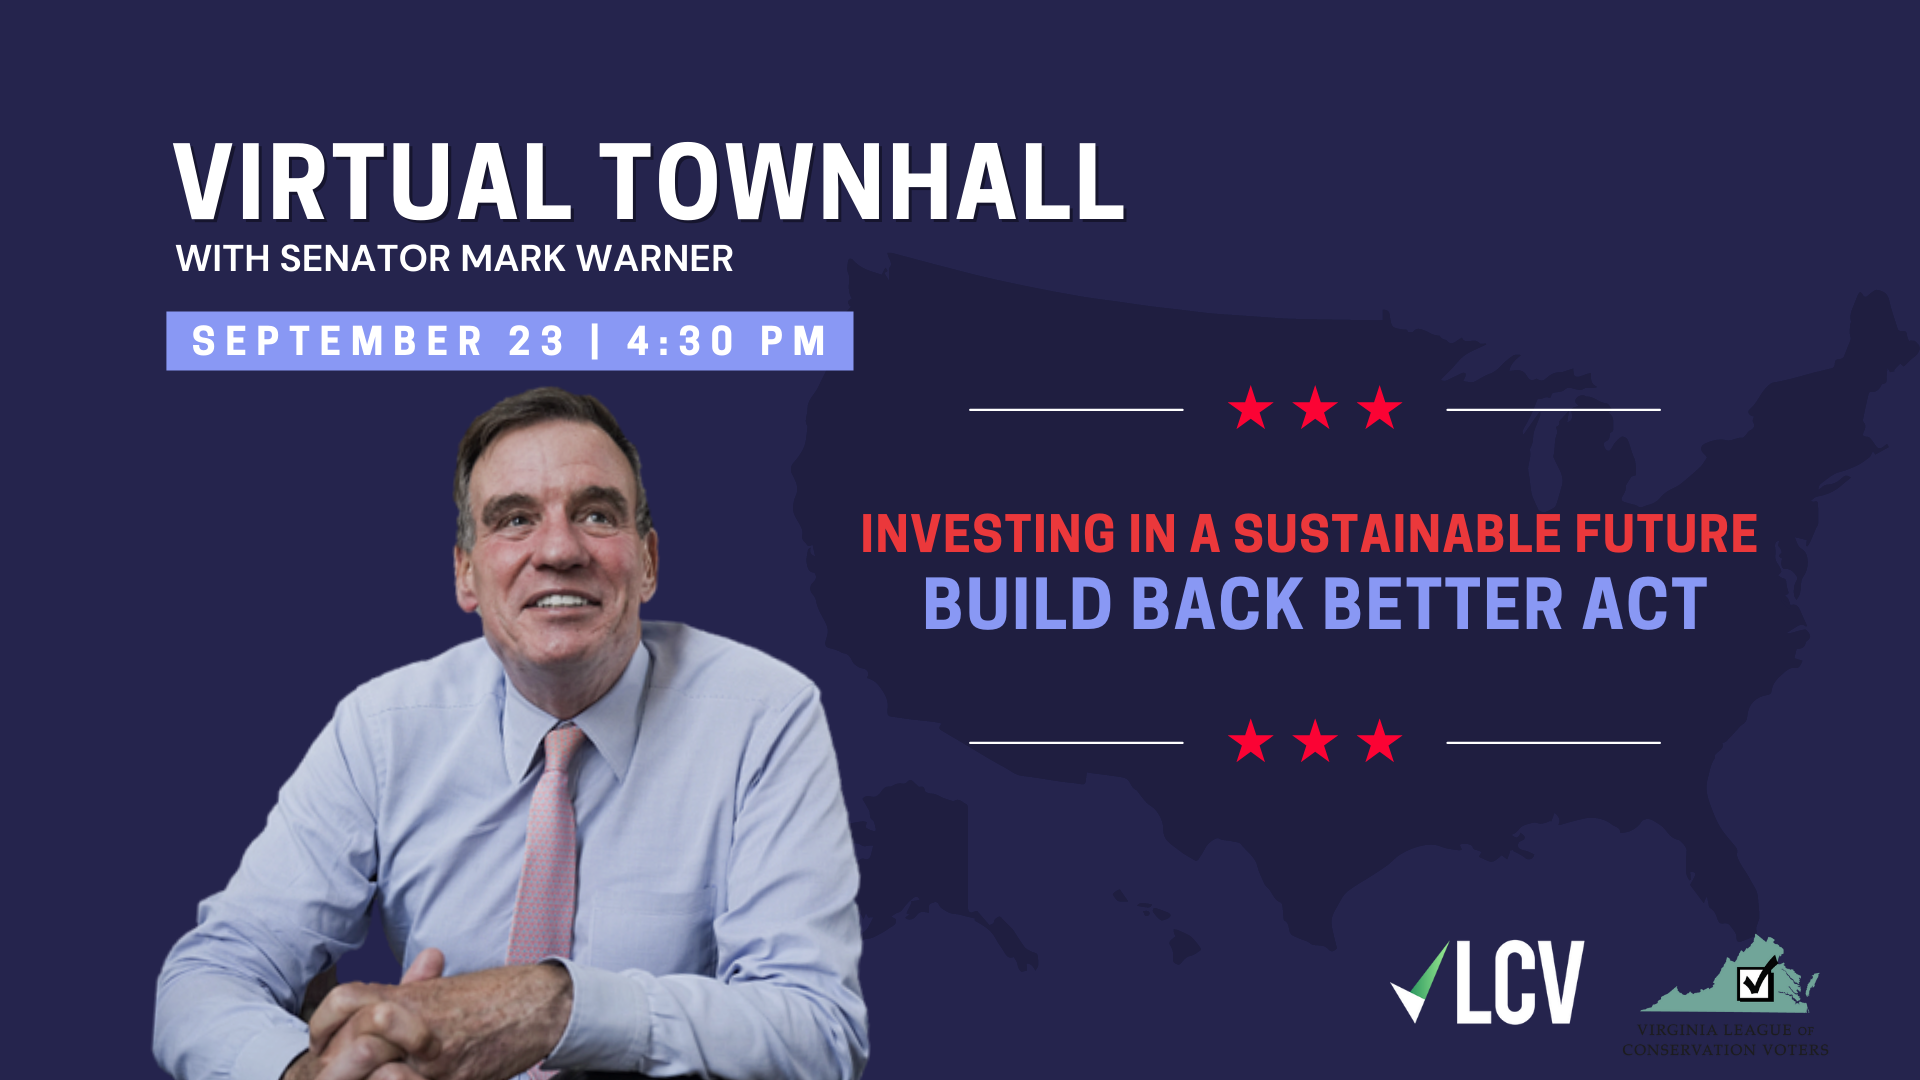 image with Mark Warner and text about the virtual townhall